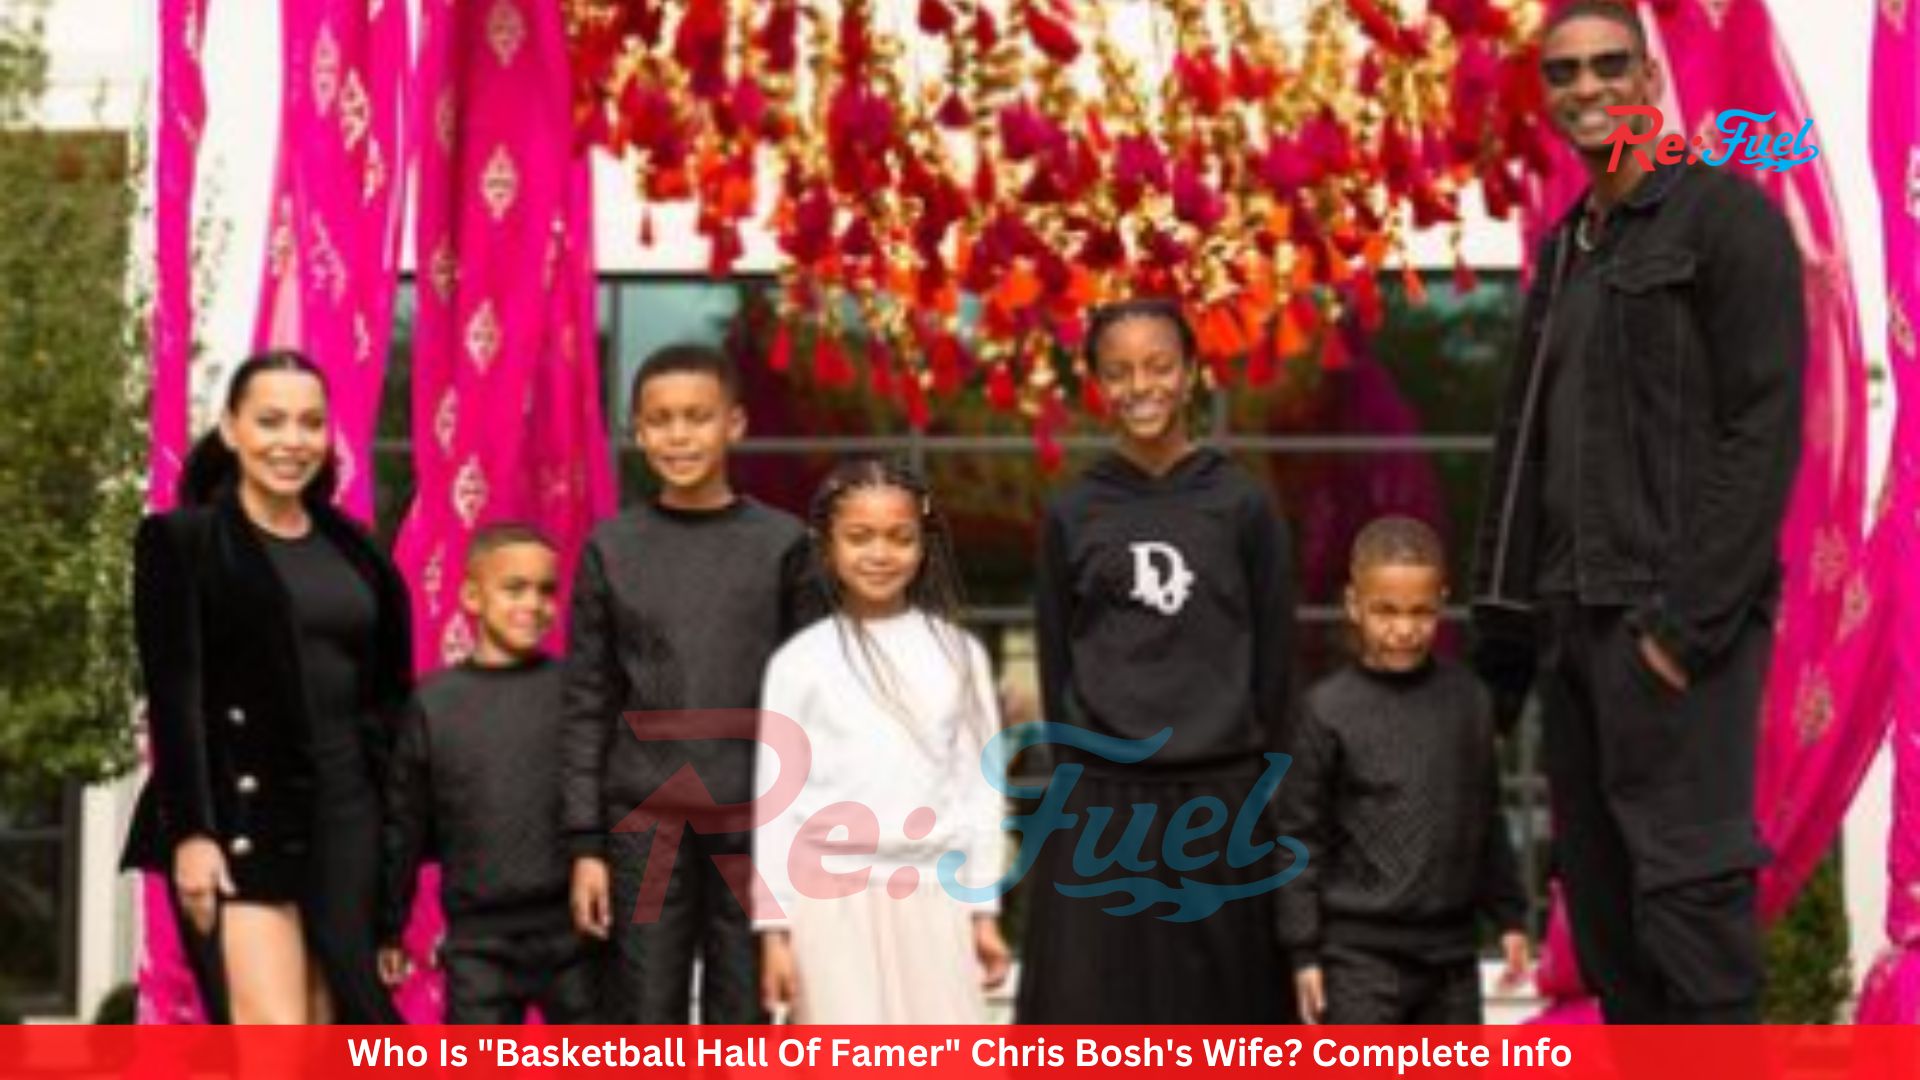 Who Is "Basketball Hall Of Famer" Chris Bosh's Wife? Complete Info